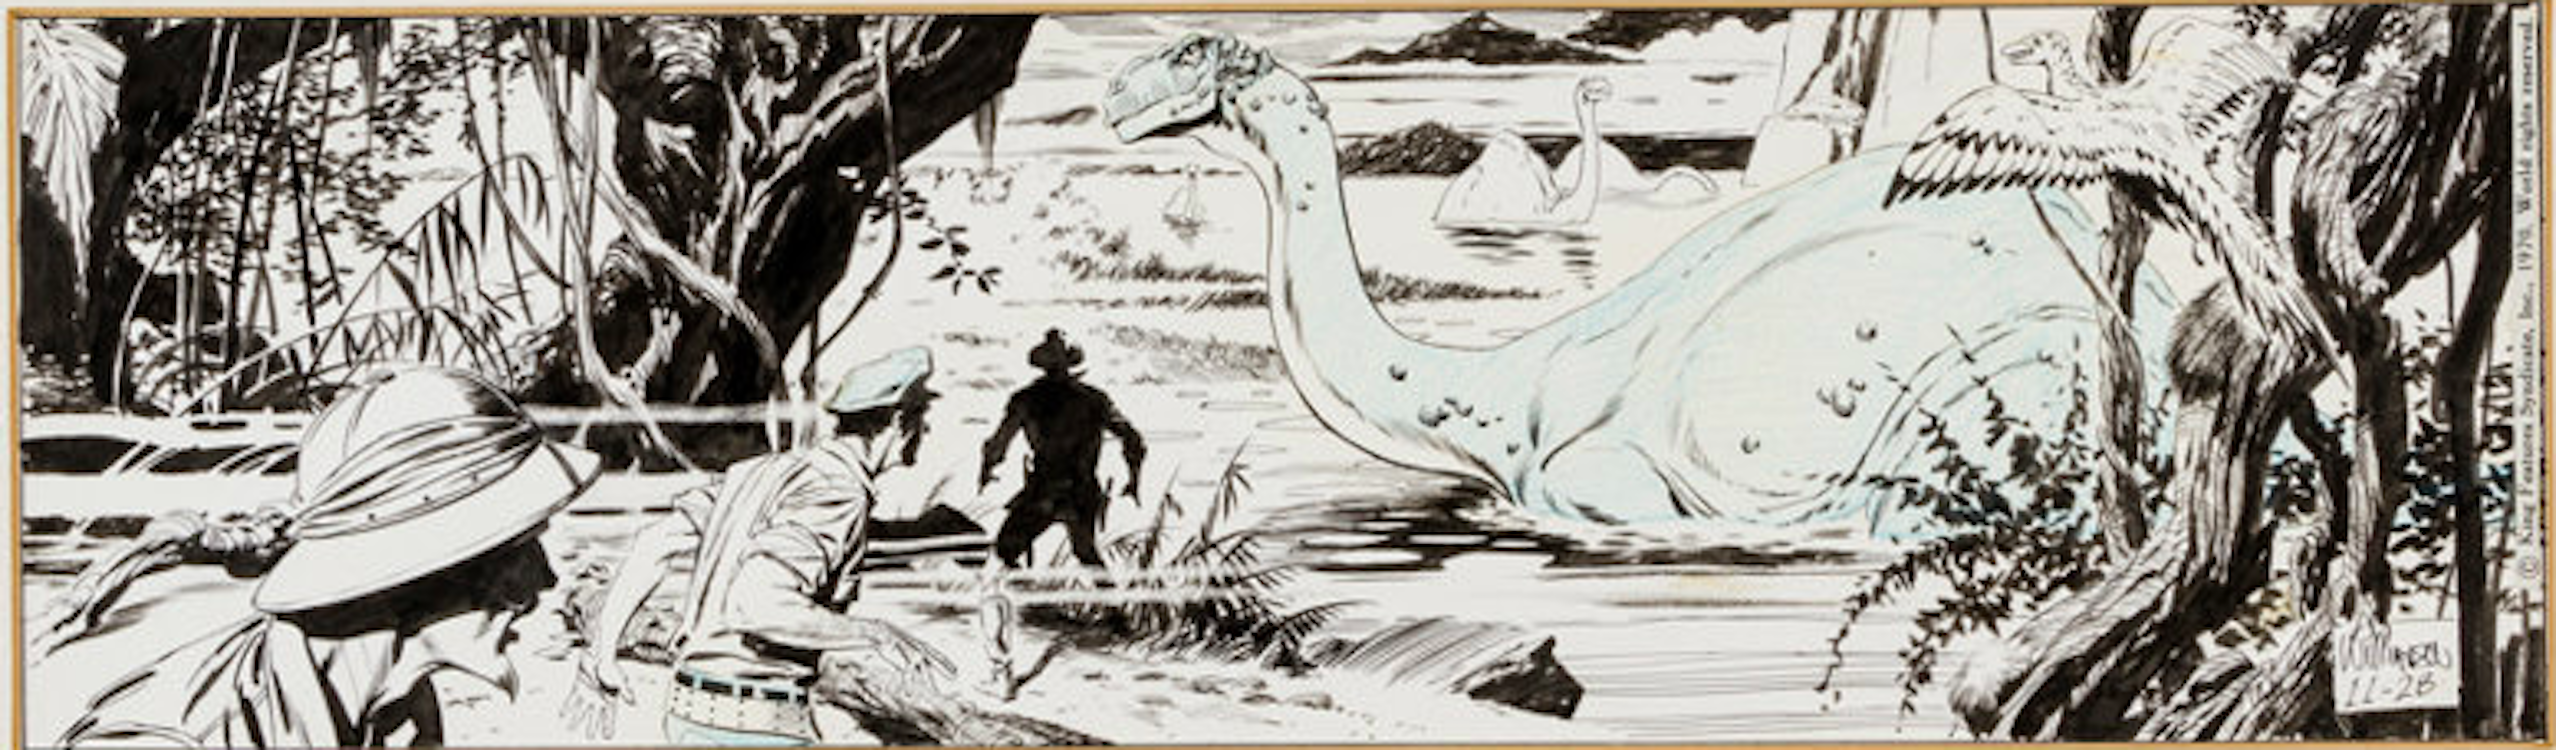 Secret Agent Corrigan Daily Comic Strip by Al Williamson sold for $5,975. Click here to get your original art appraised.